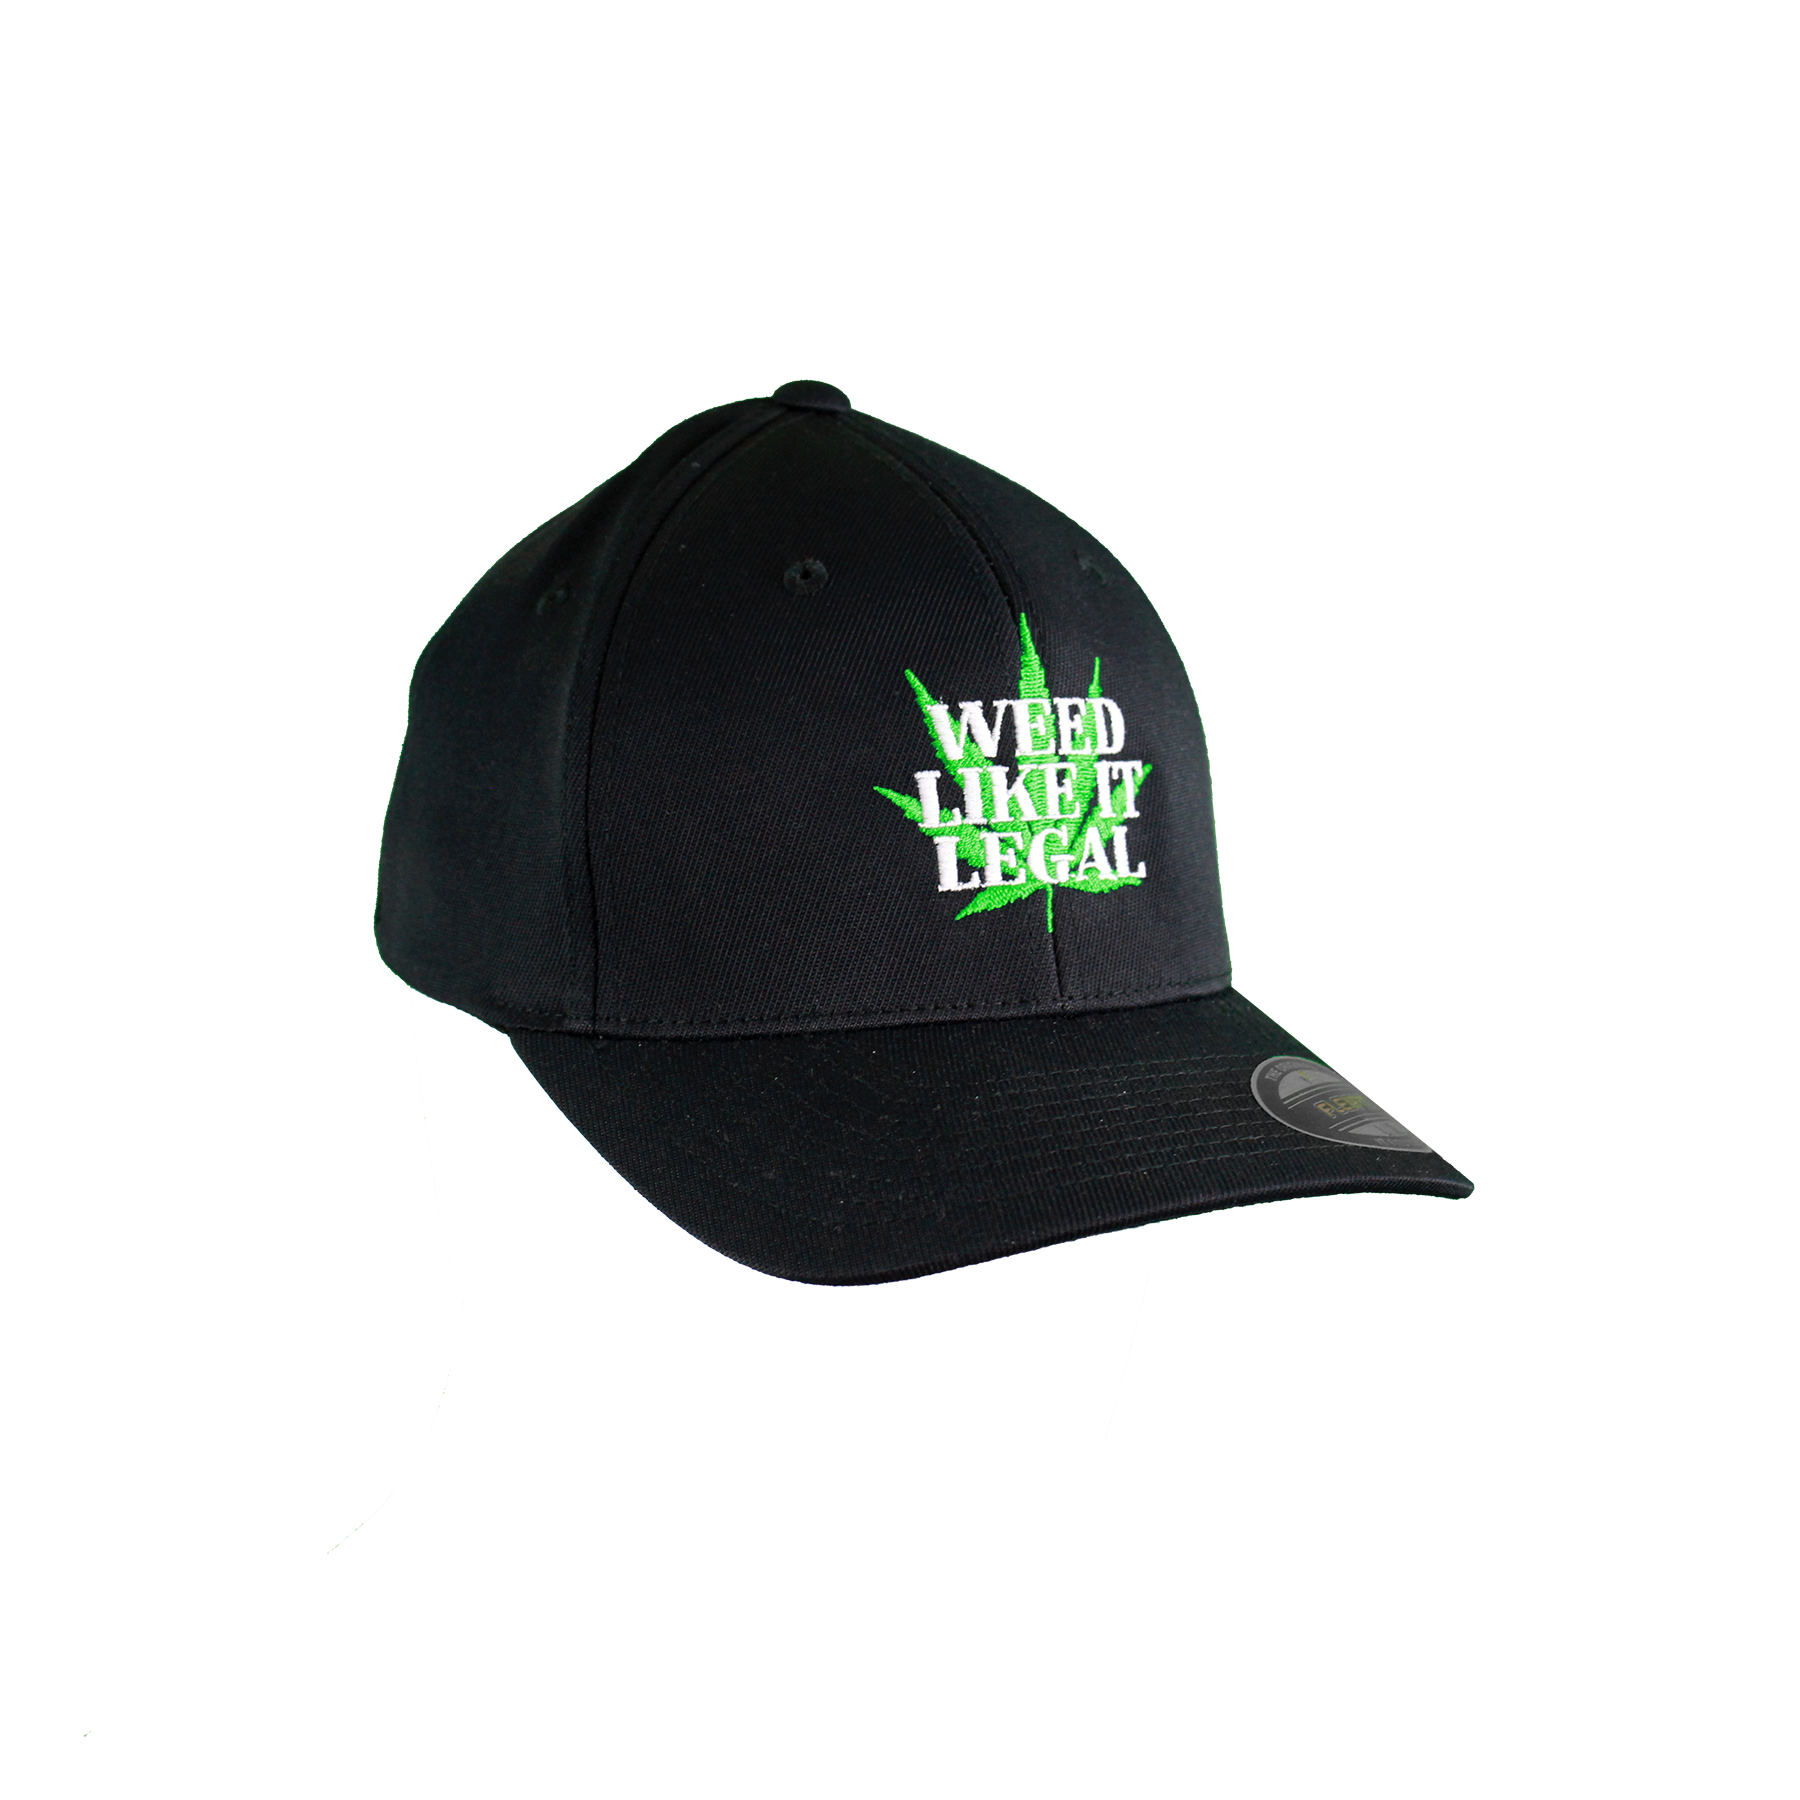 WEED LIKE IT LEGAL Black Fitted Hat • Malanajuana